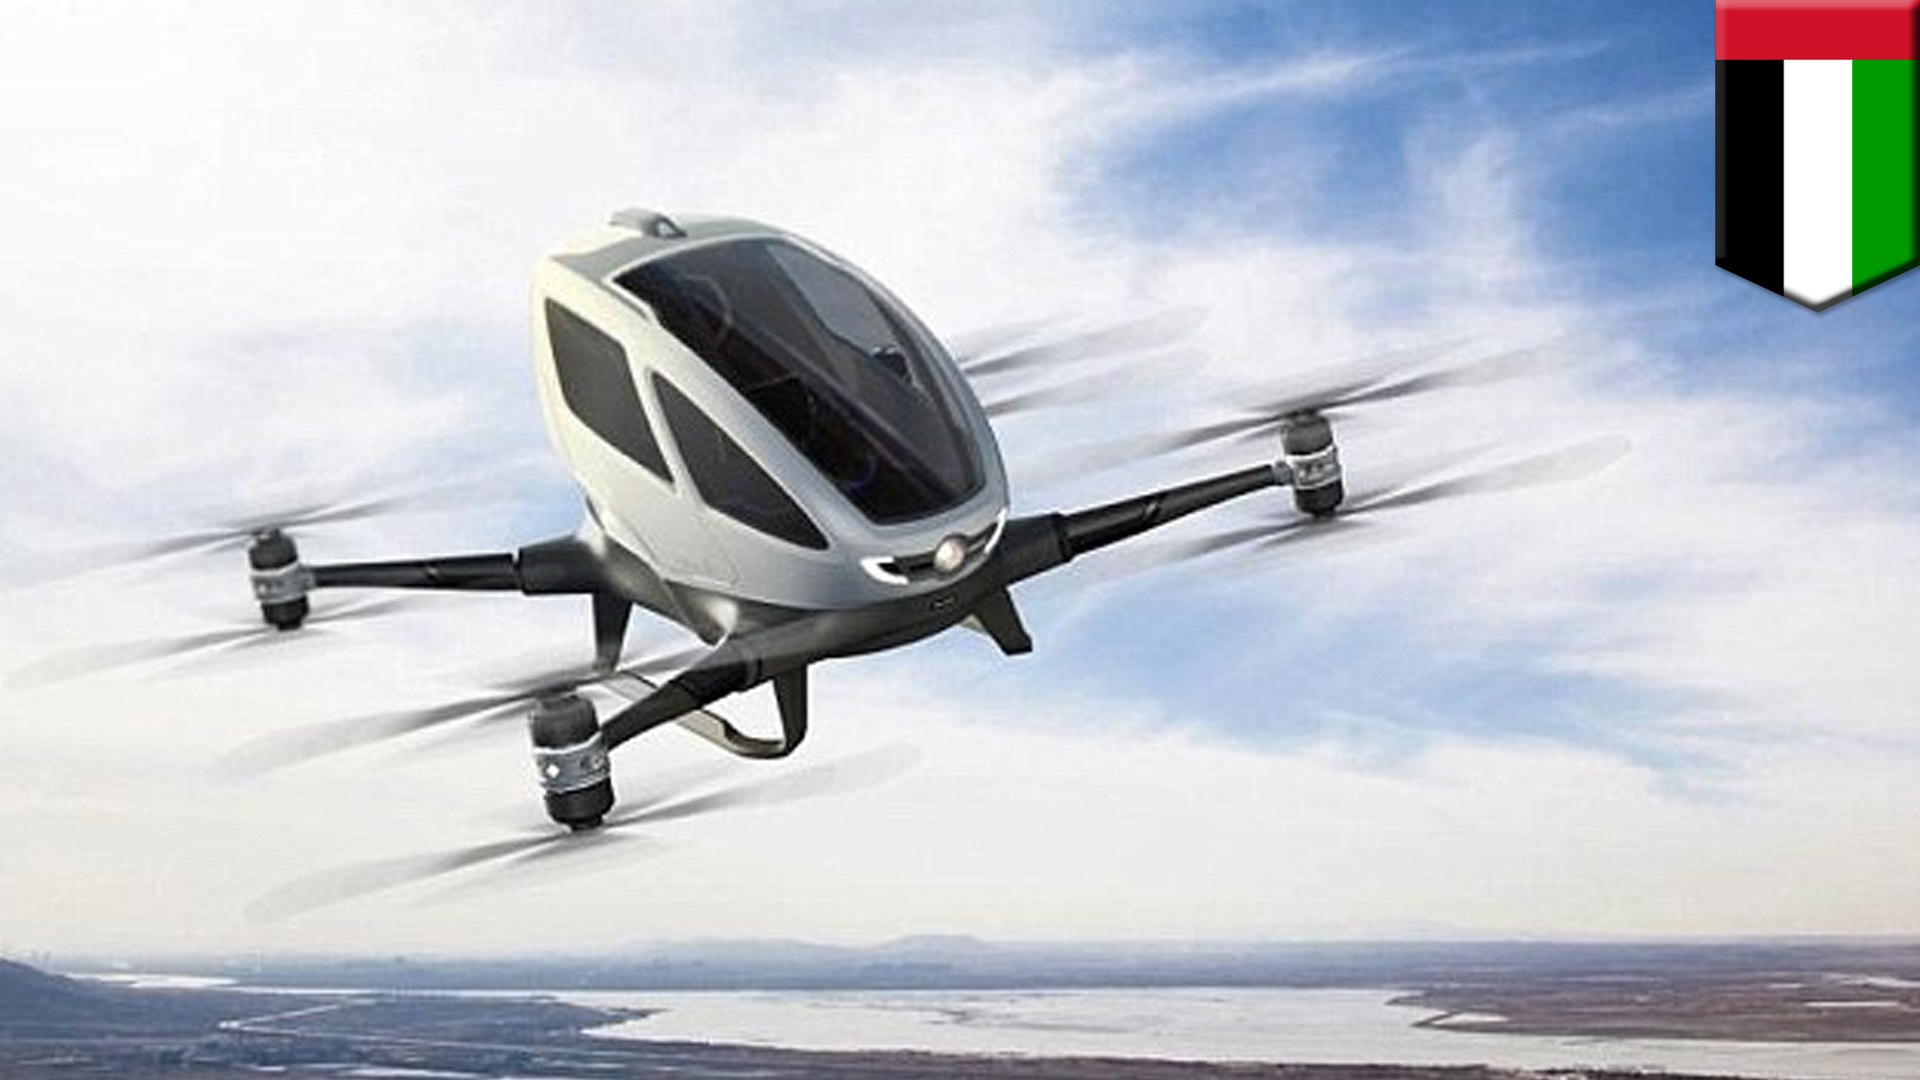 Dubai goes all Jetsons introduction of flying taxi drones - video Dailymotion